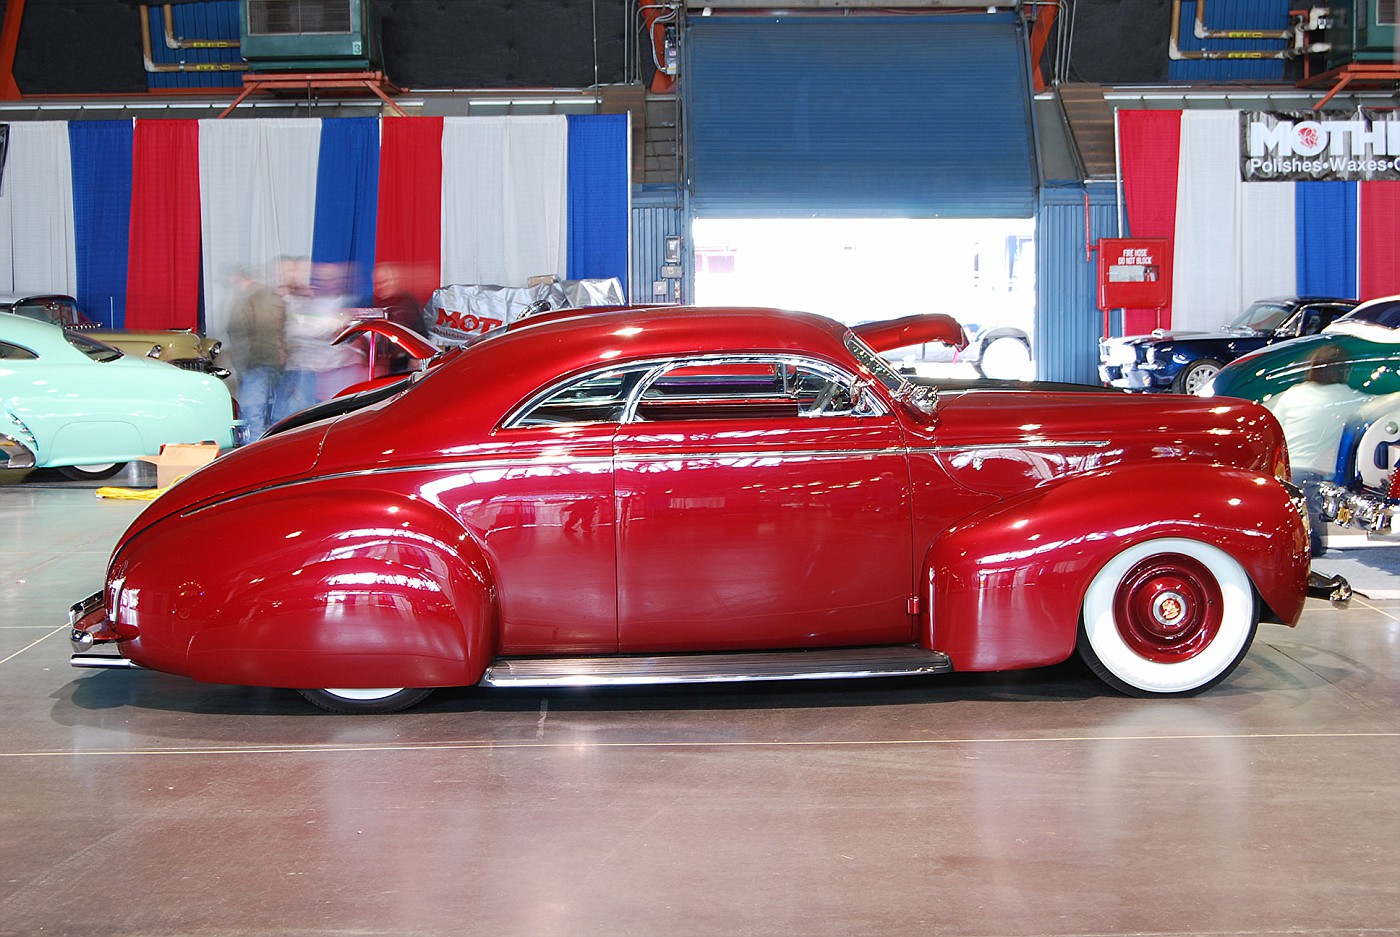 Luckly Dany ONeill was able to bring his very fine 1940 Mercury coupe